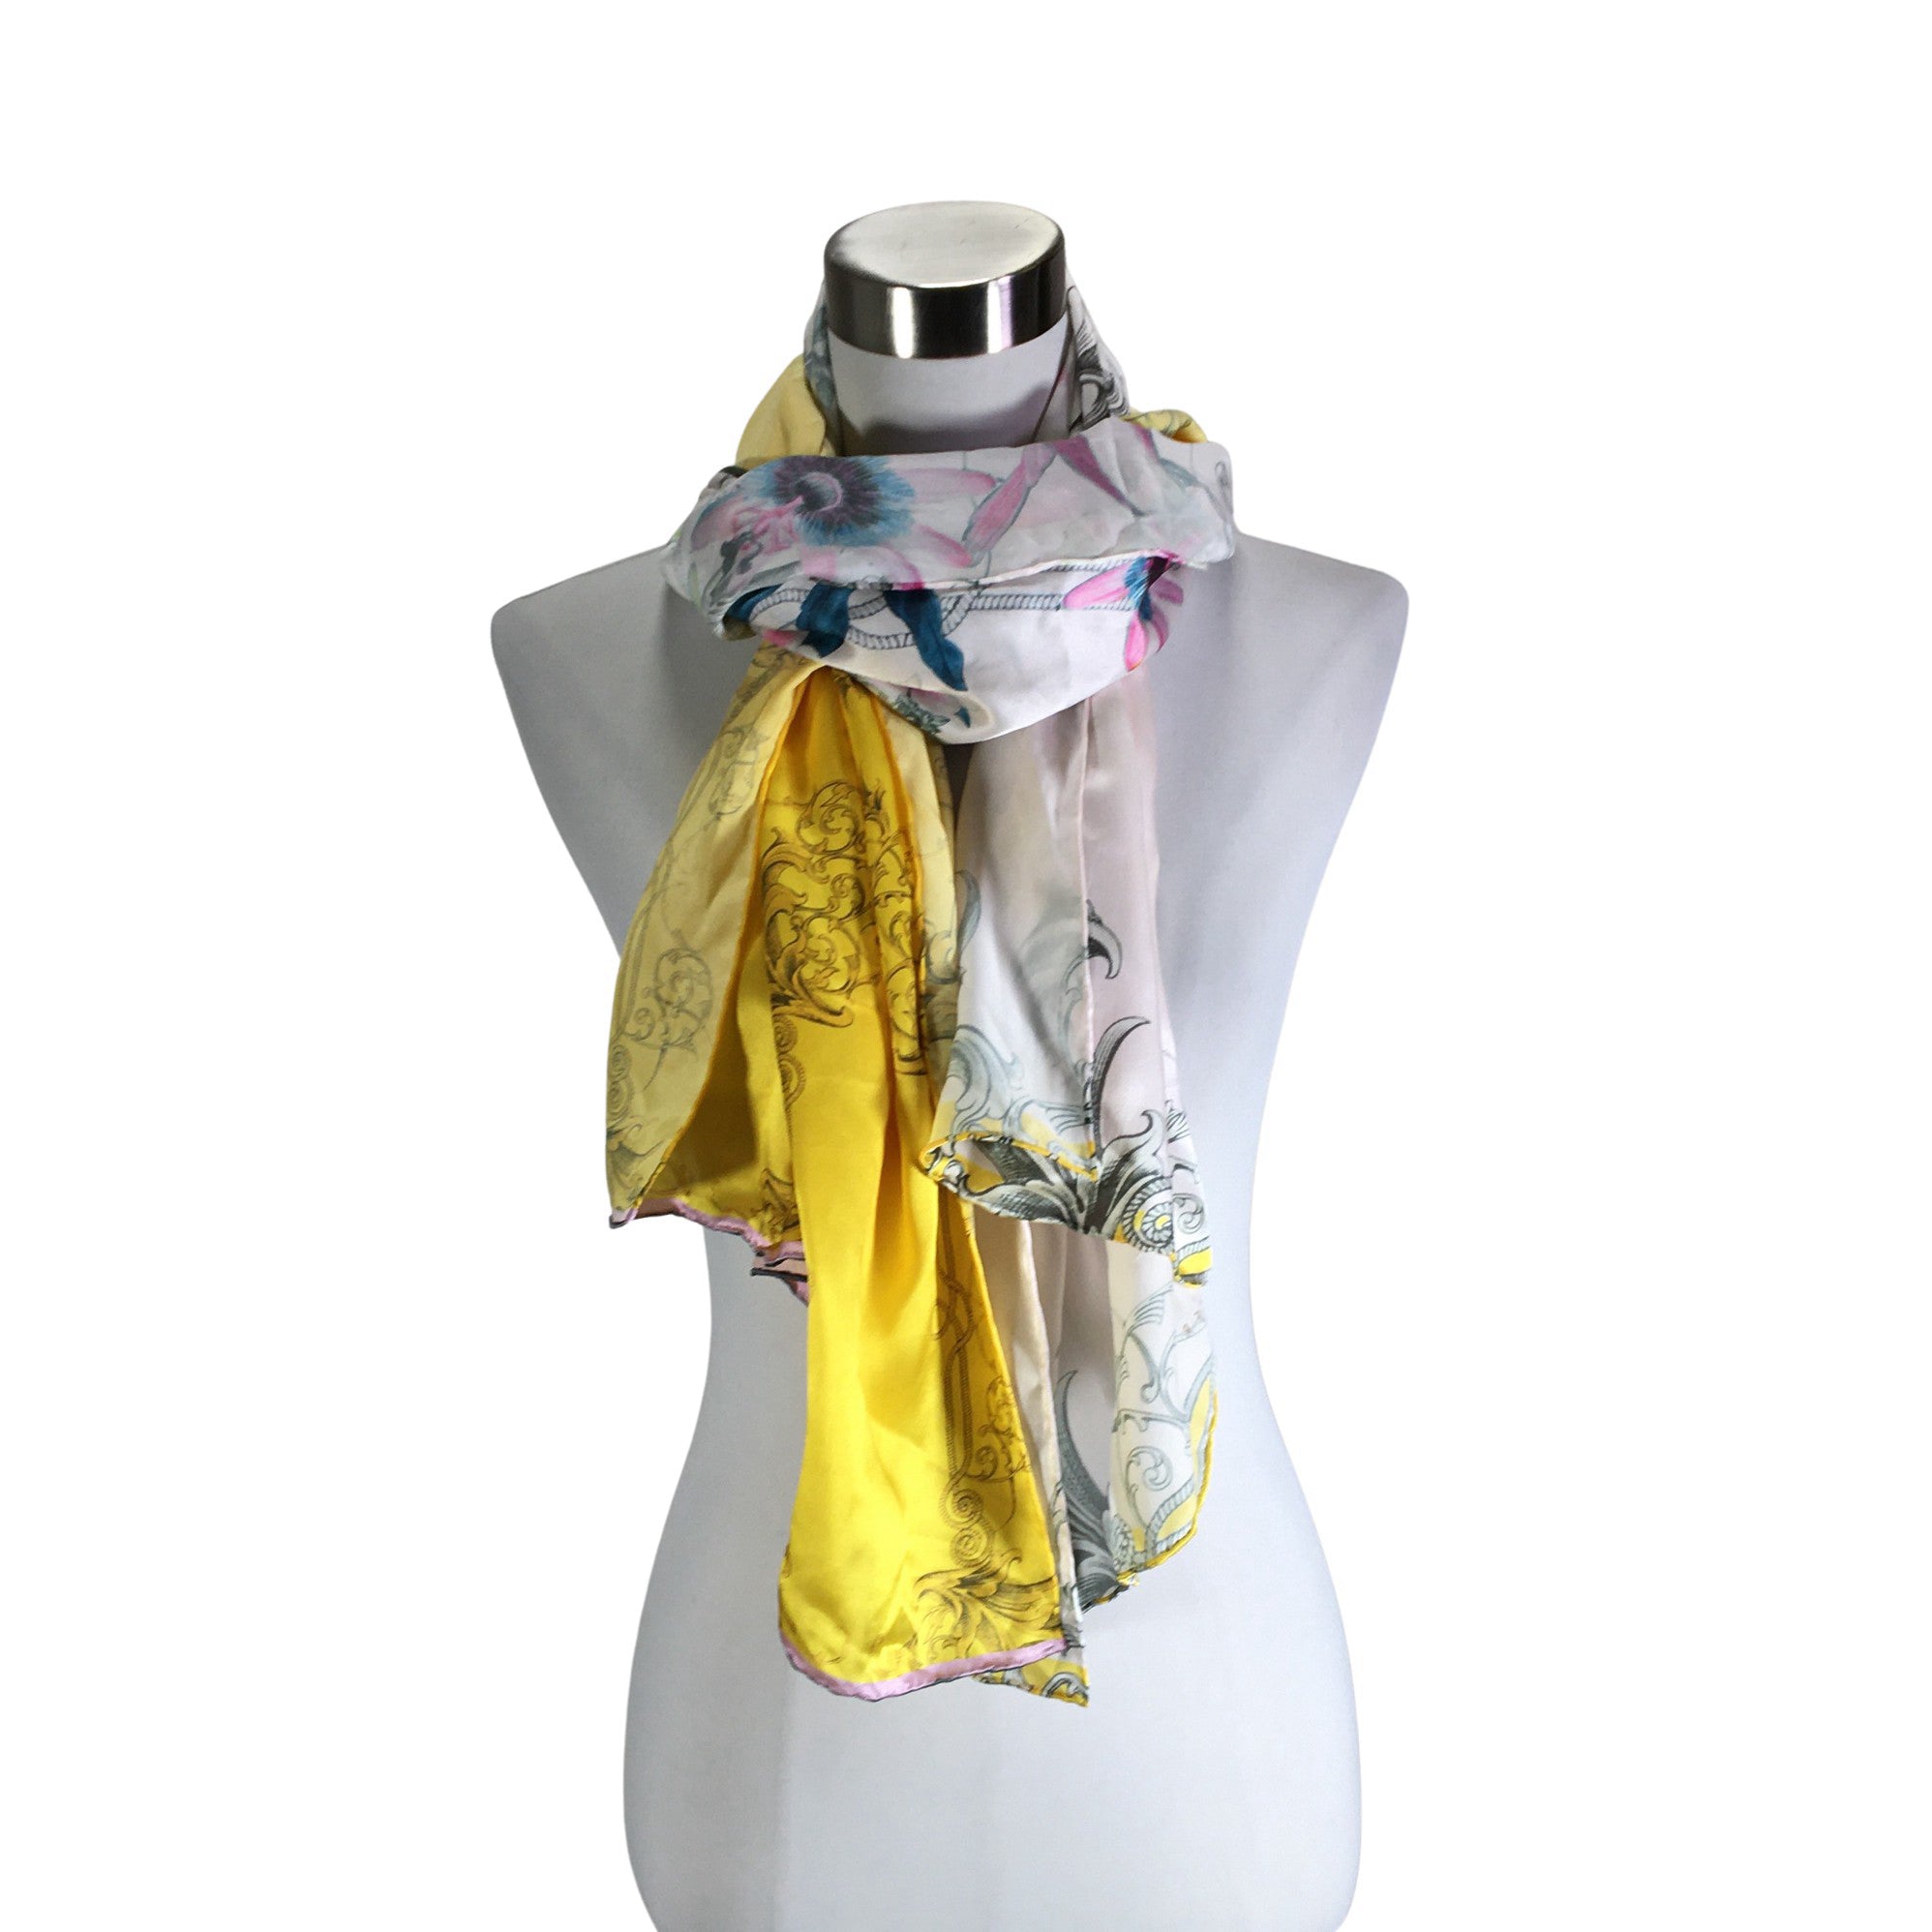 Women's Ted Baker Scarf, size Maxi (Naturaalne valge) | Emmy